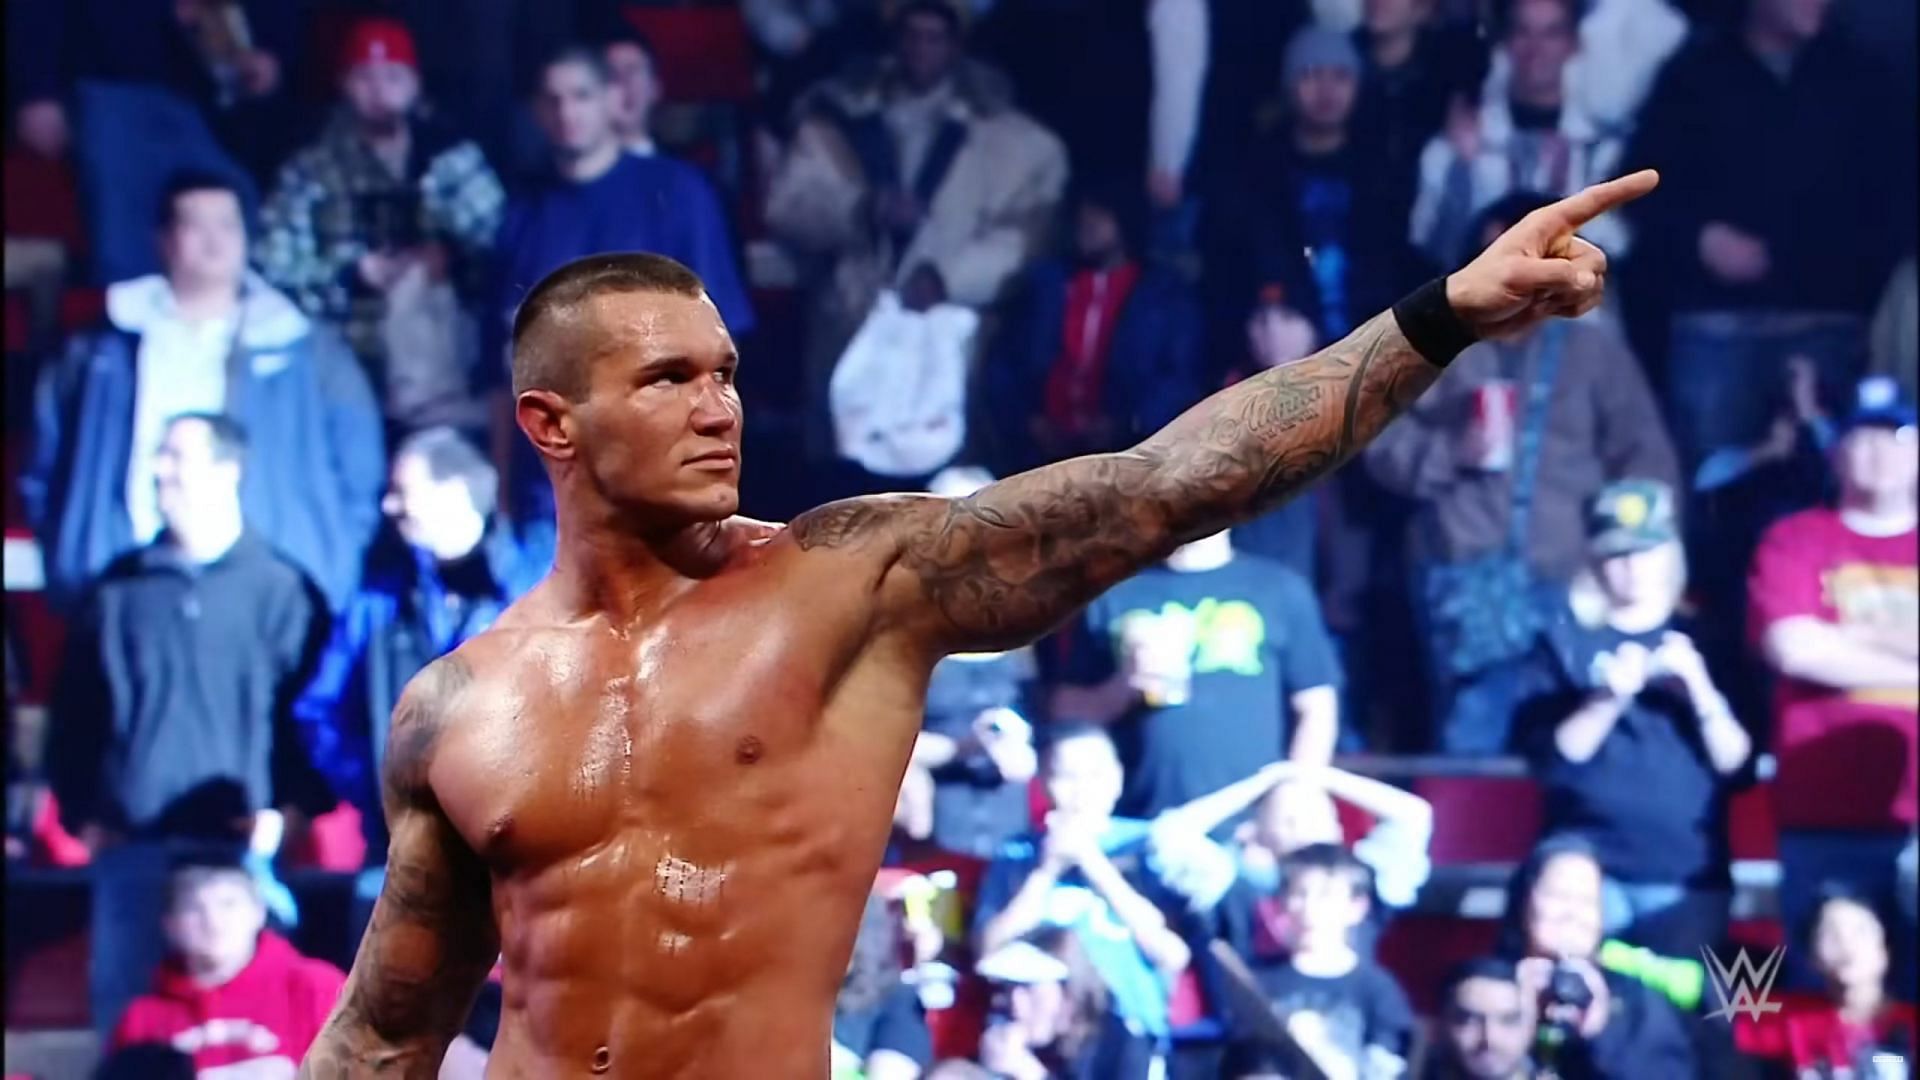 The Viper Randy Orton recently returned to action!